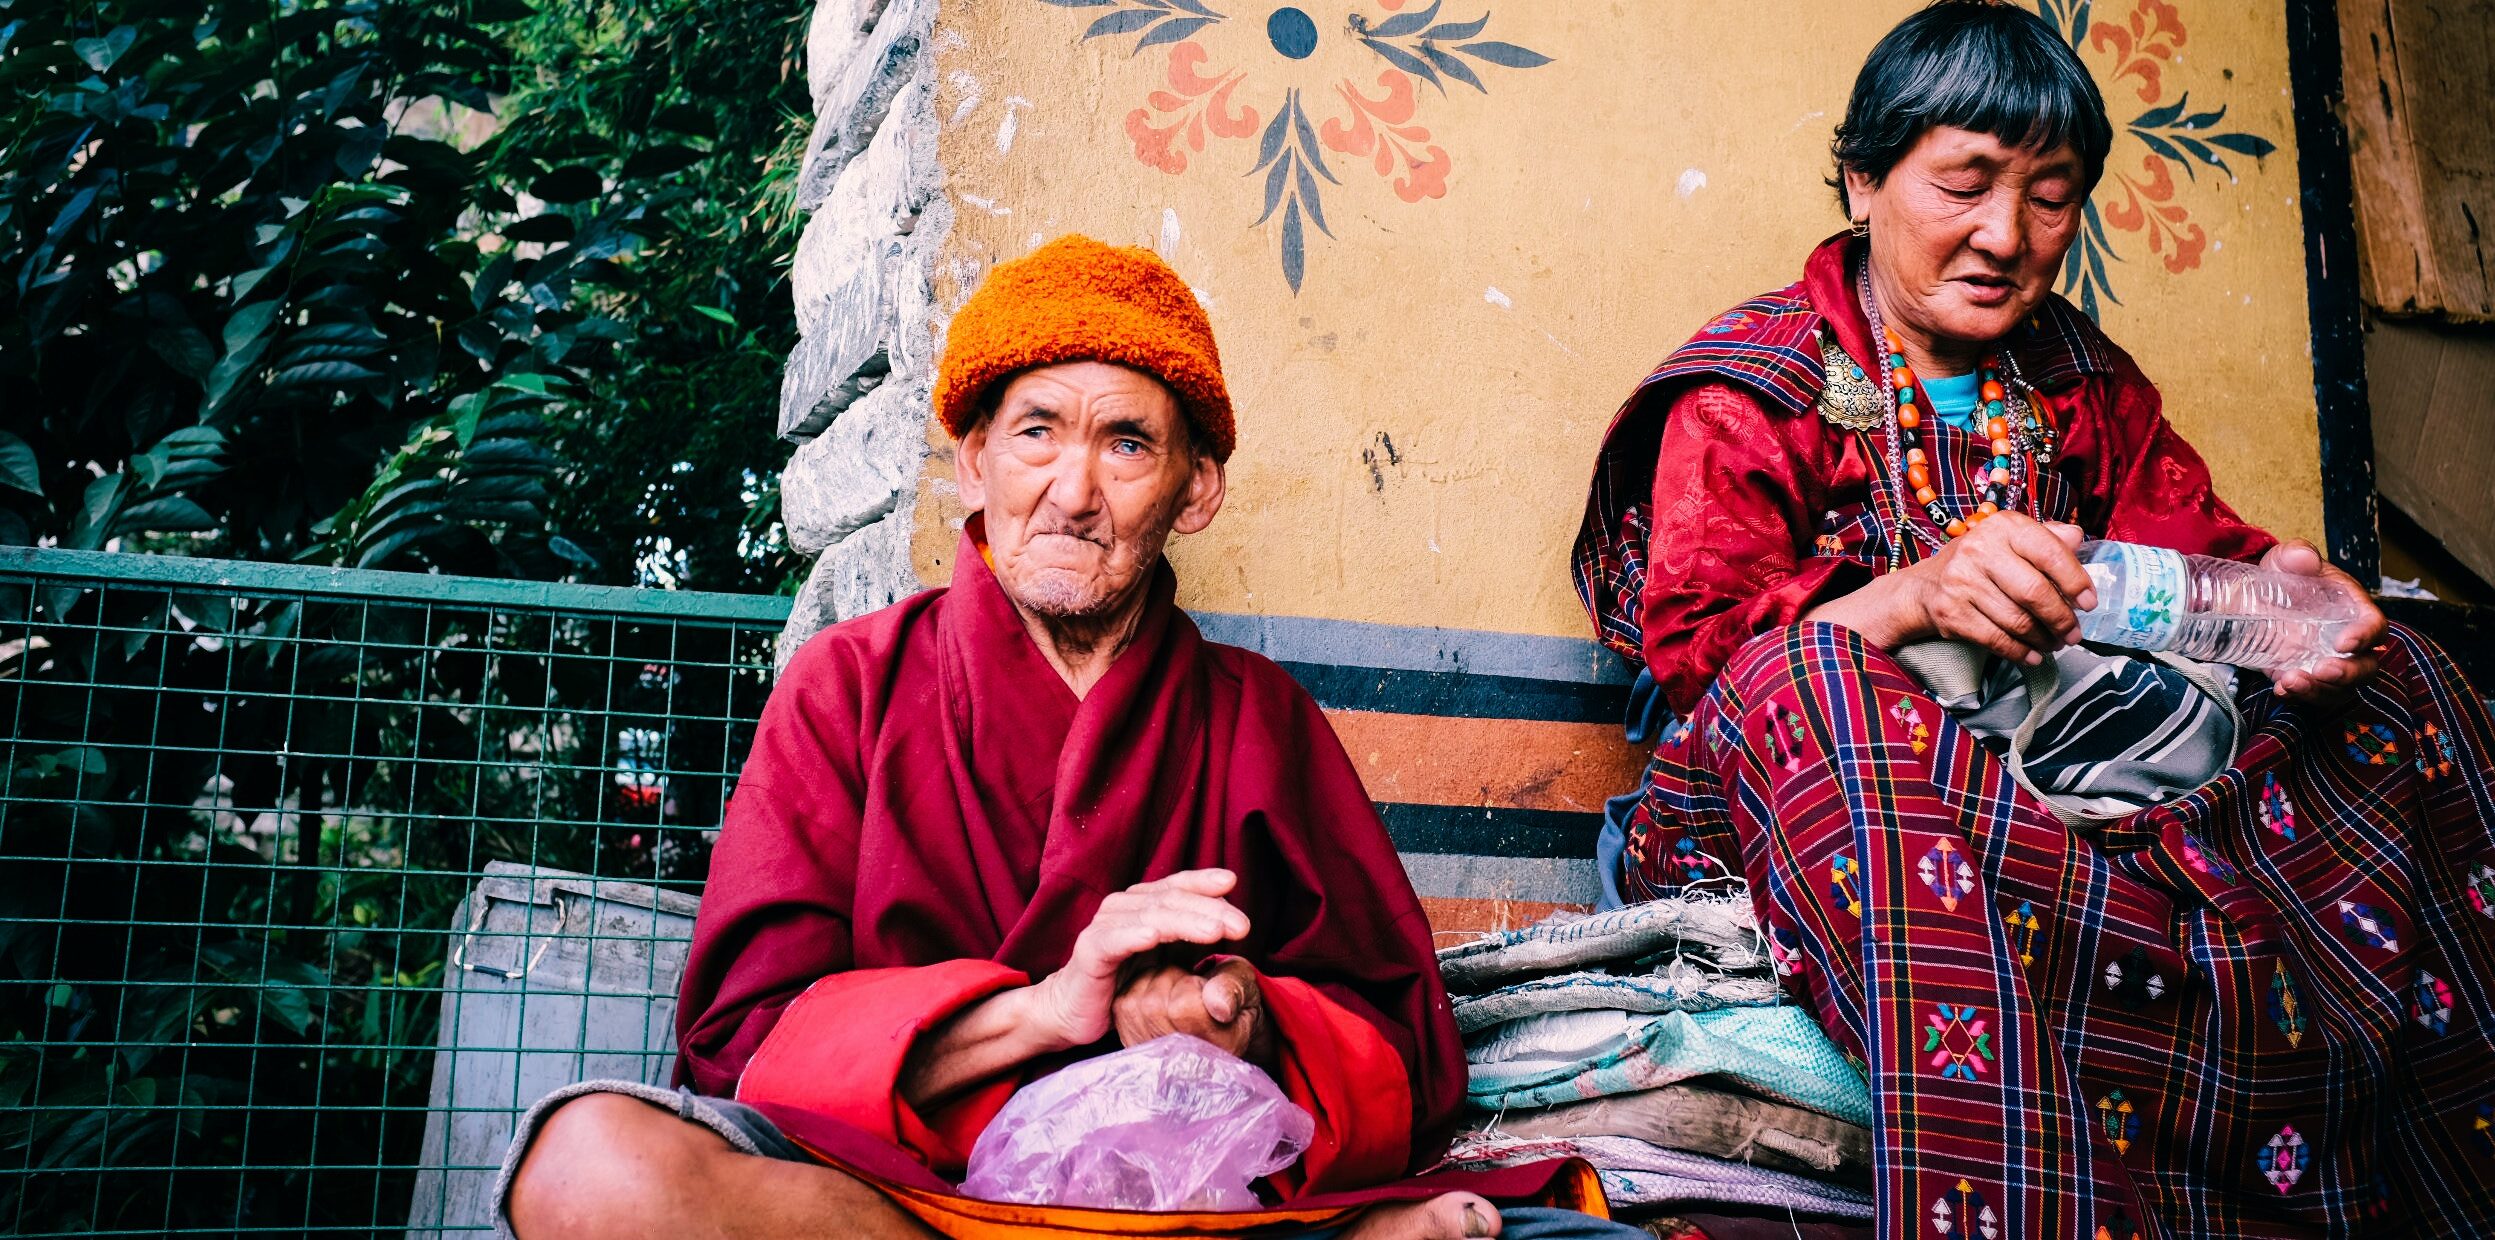 Bhutanese man and woman chanting while sitting.